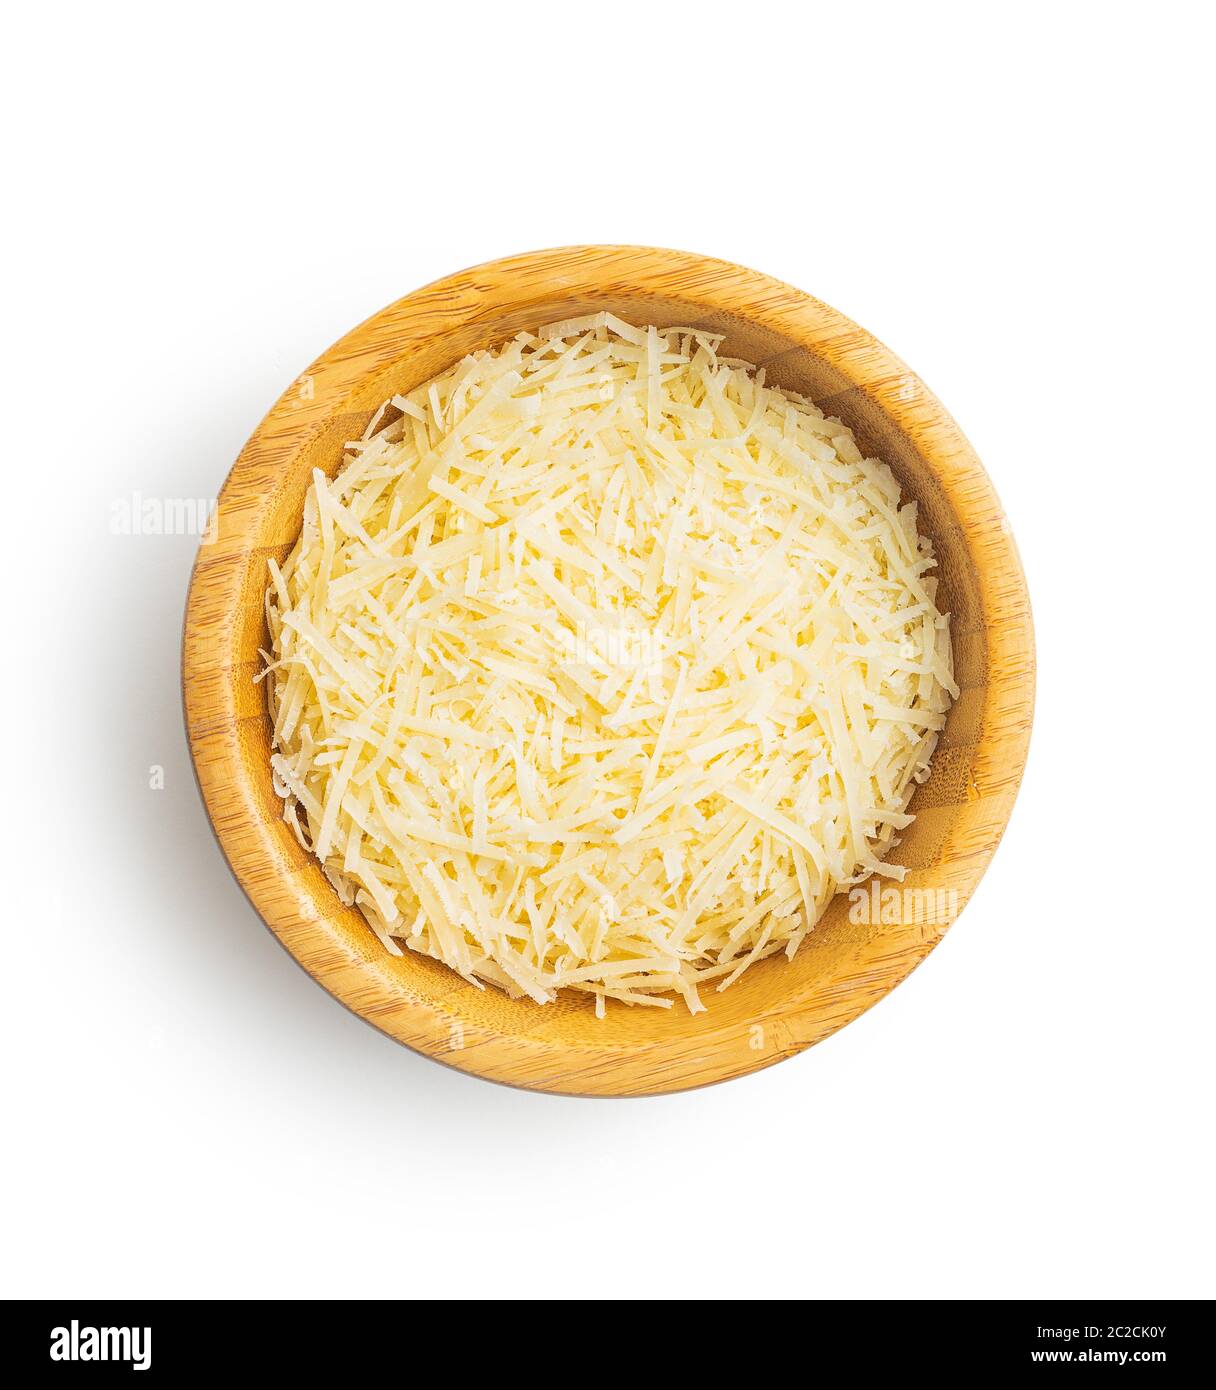 https://c8.alamy.com/comp/2C2CK0Y/tasty-grated-cheese-parmesan-cheese-in-bowl-isolated-on-white-background-2C2CK0Y.jpg